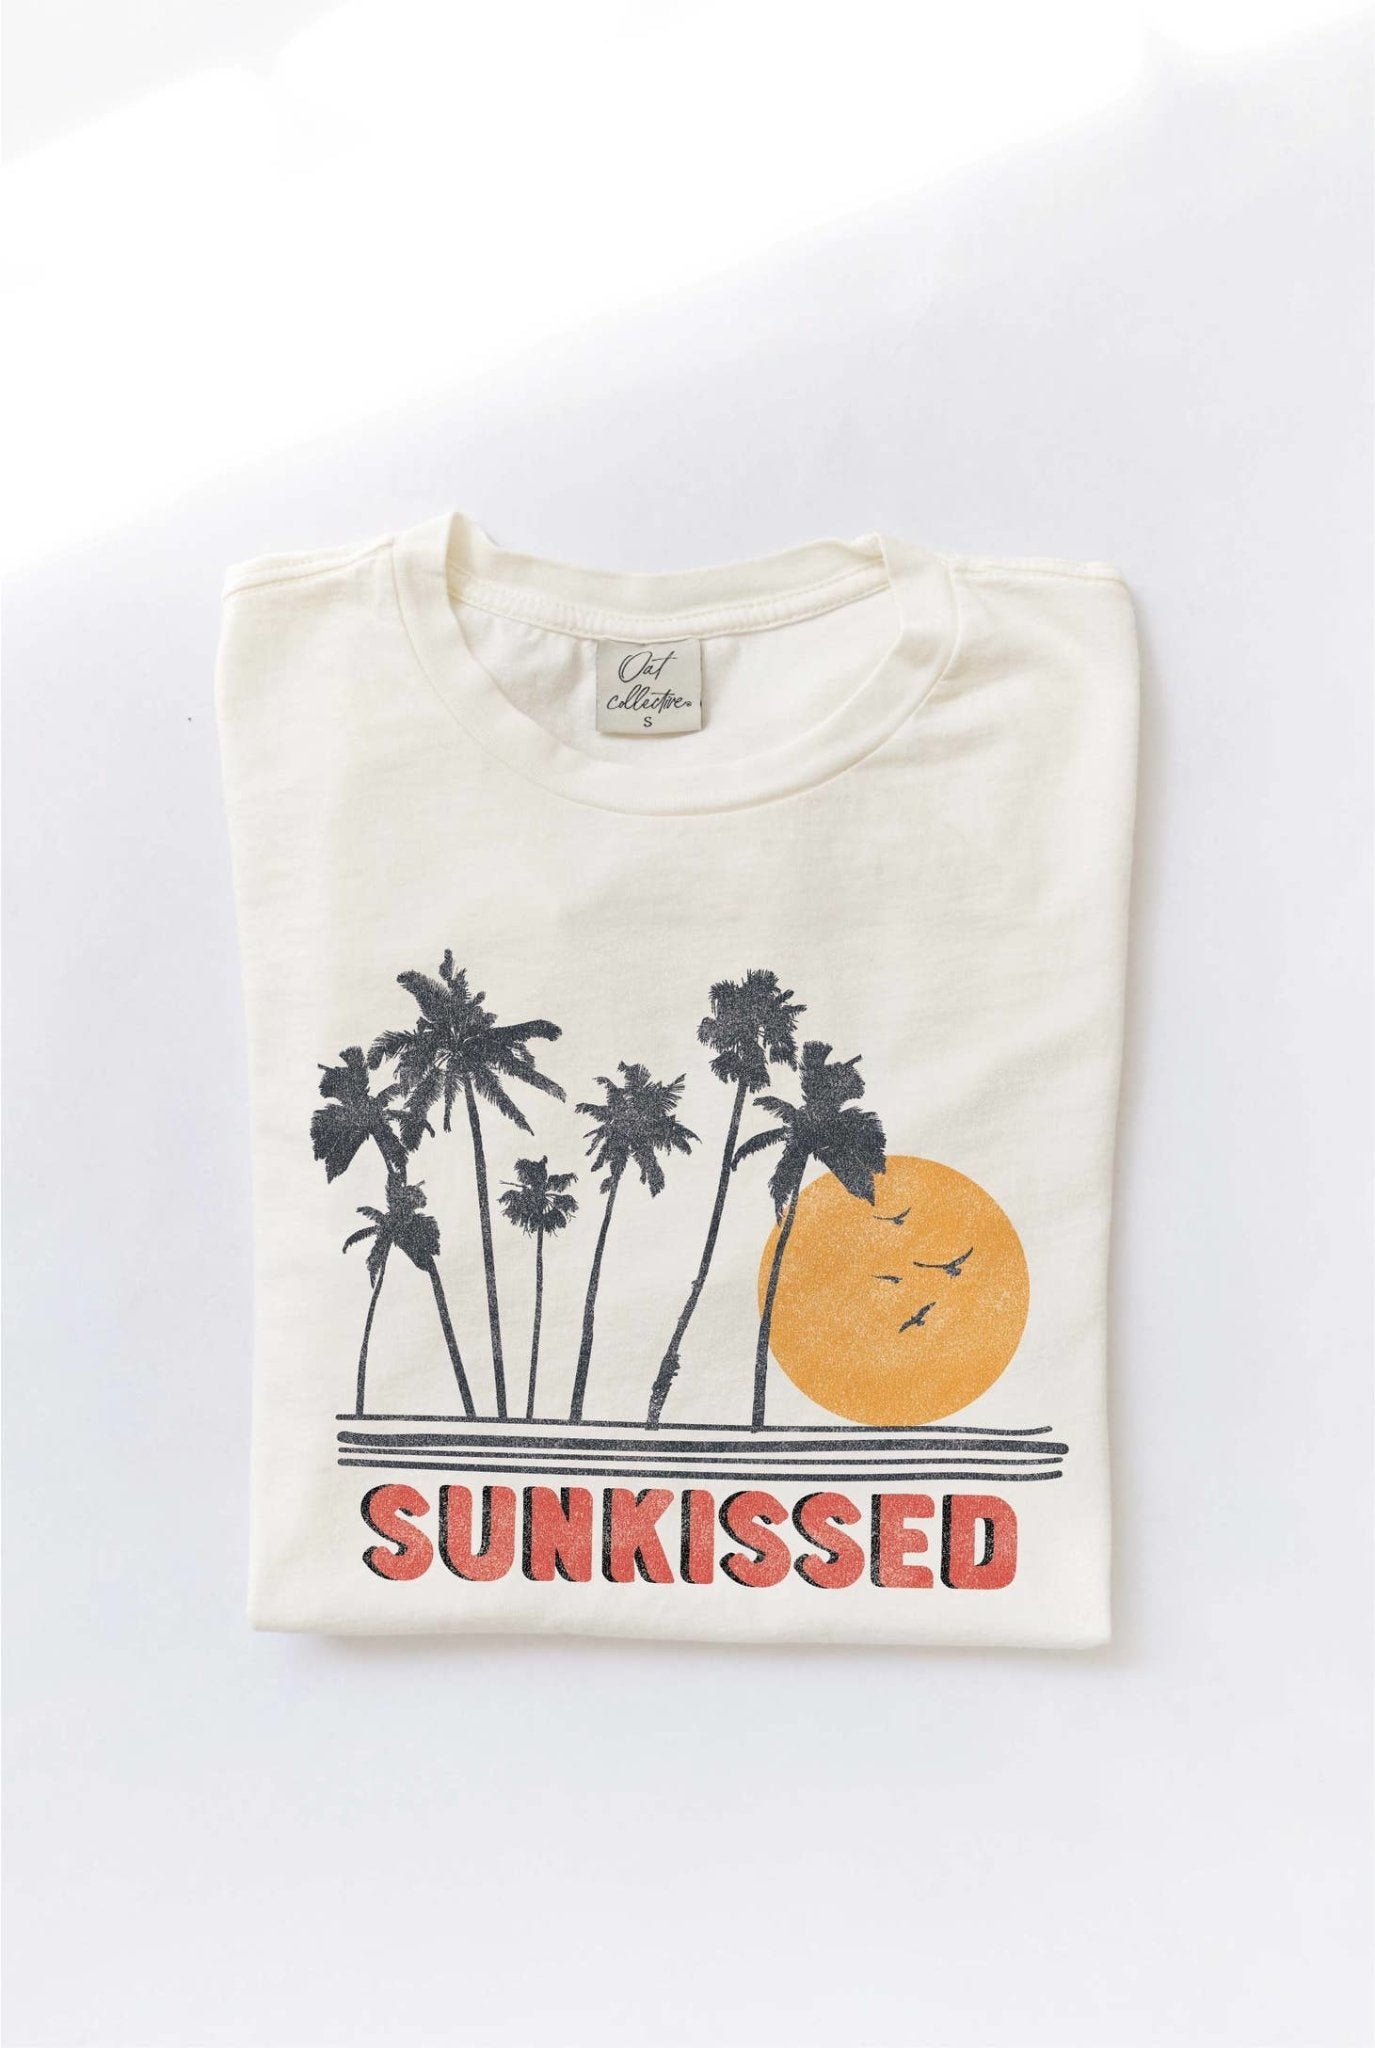 Sunkissed Graphic T-Shirt - The Riviera Towel Company